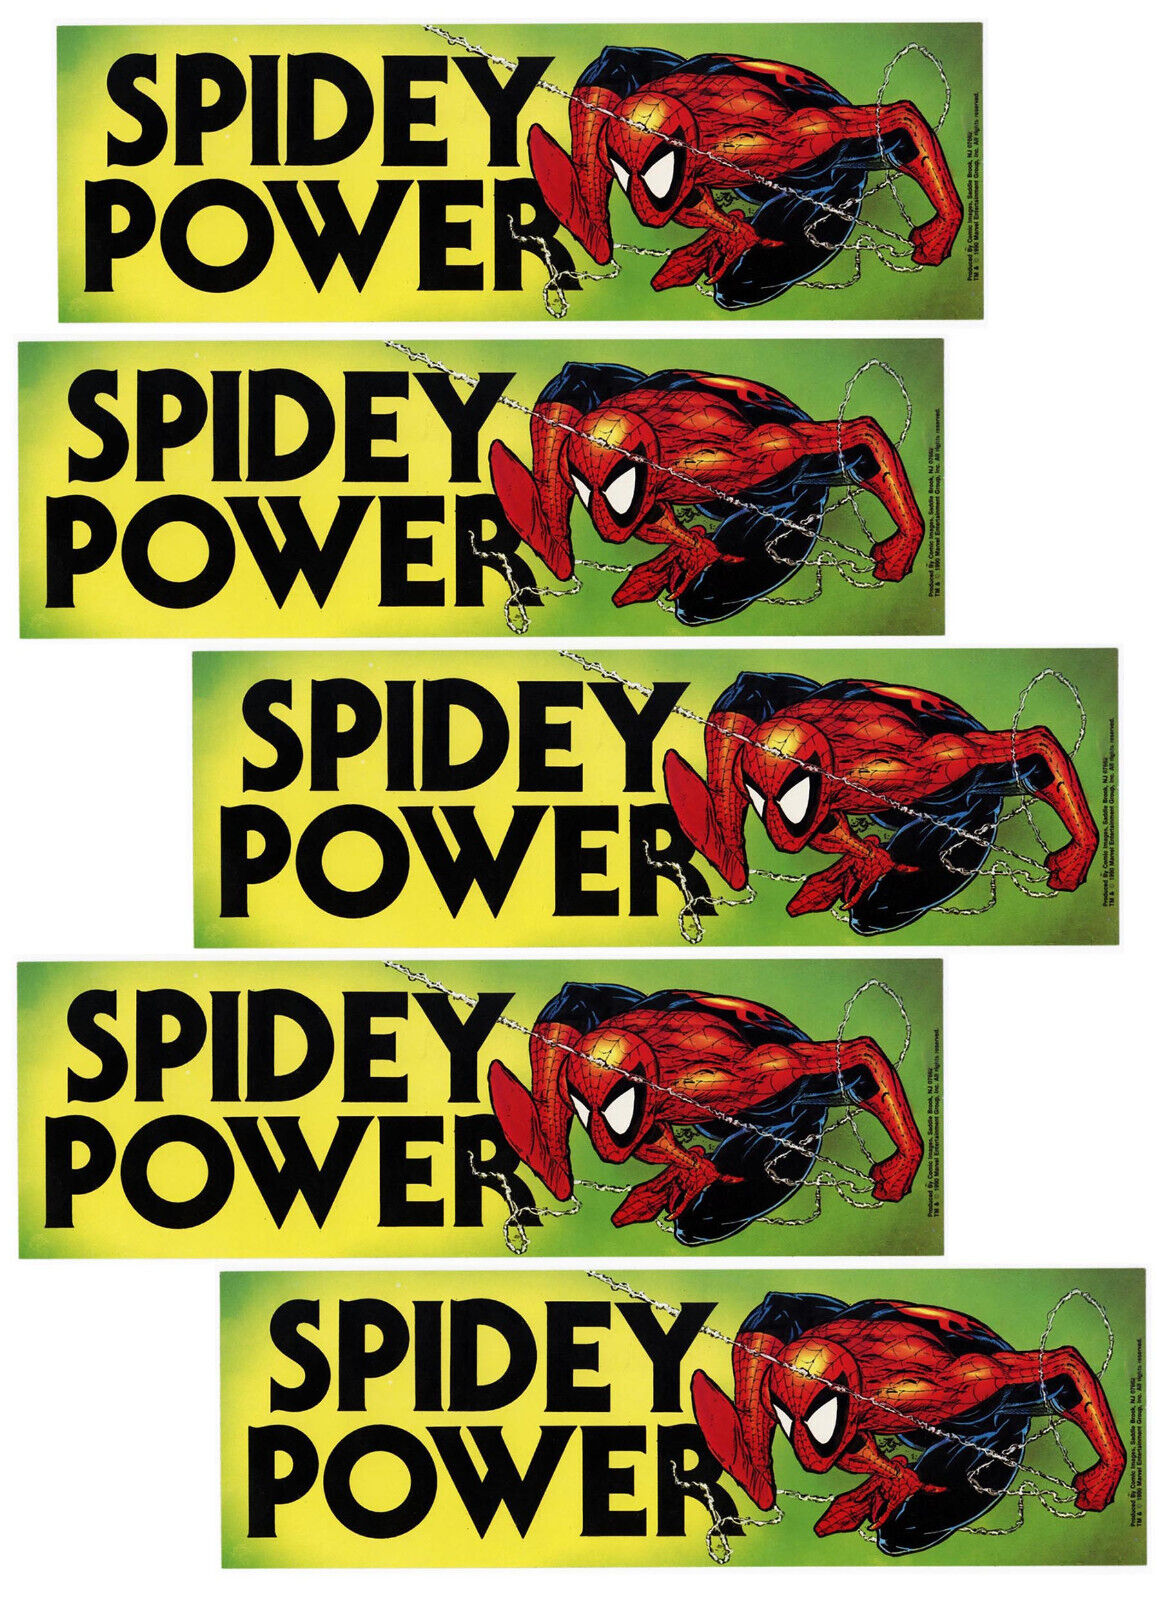 SPIDEY POWER - Group of FIVE - 11